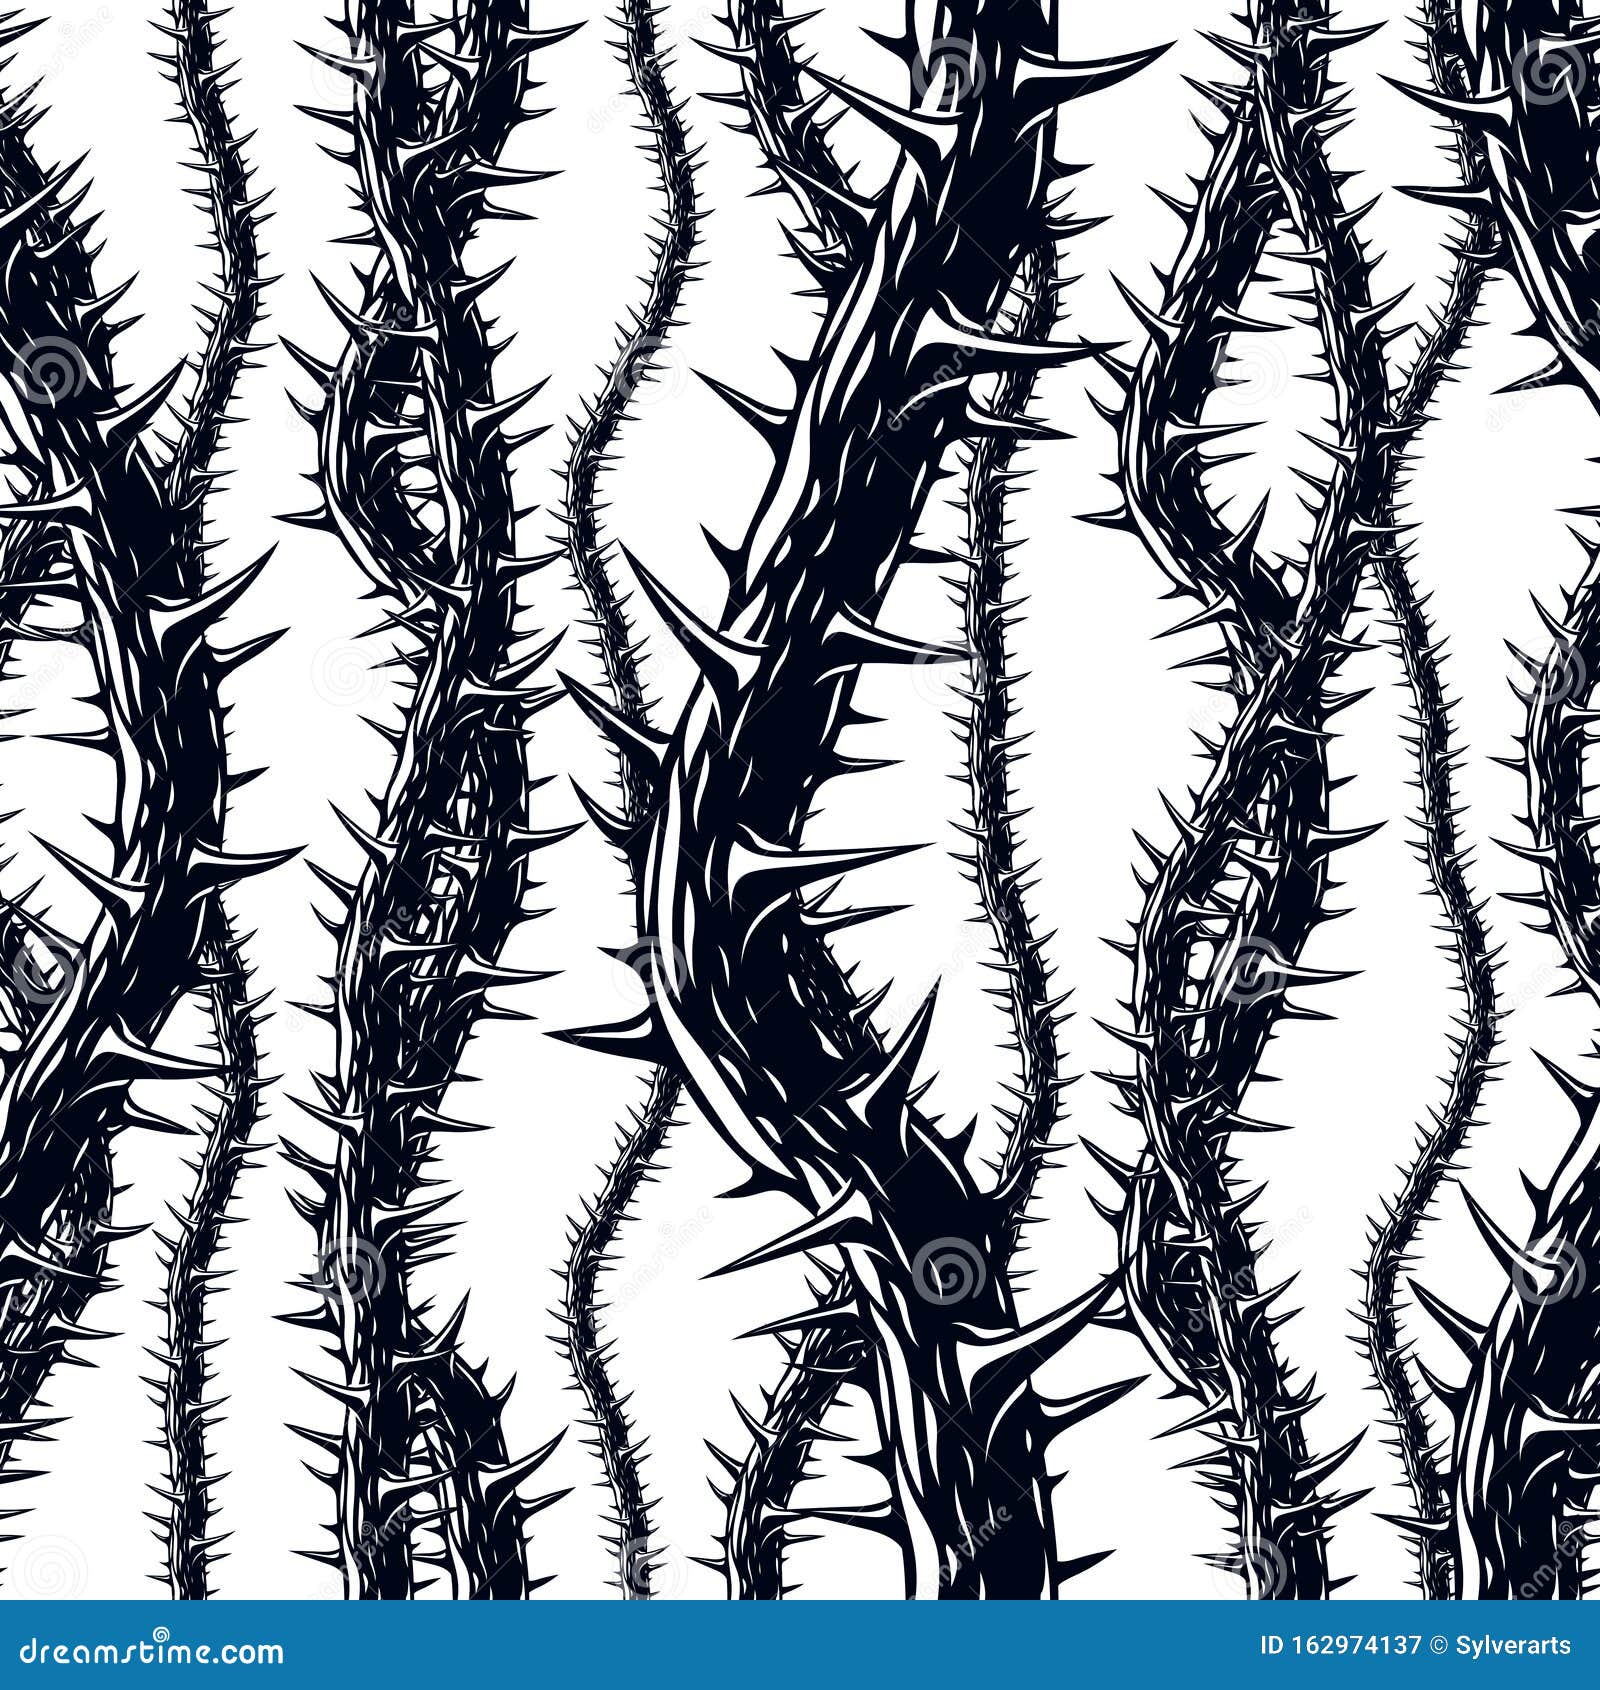 Disgusting Horror Art and Nightmare Seamless Pattern, Vector Background ...